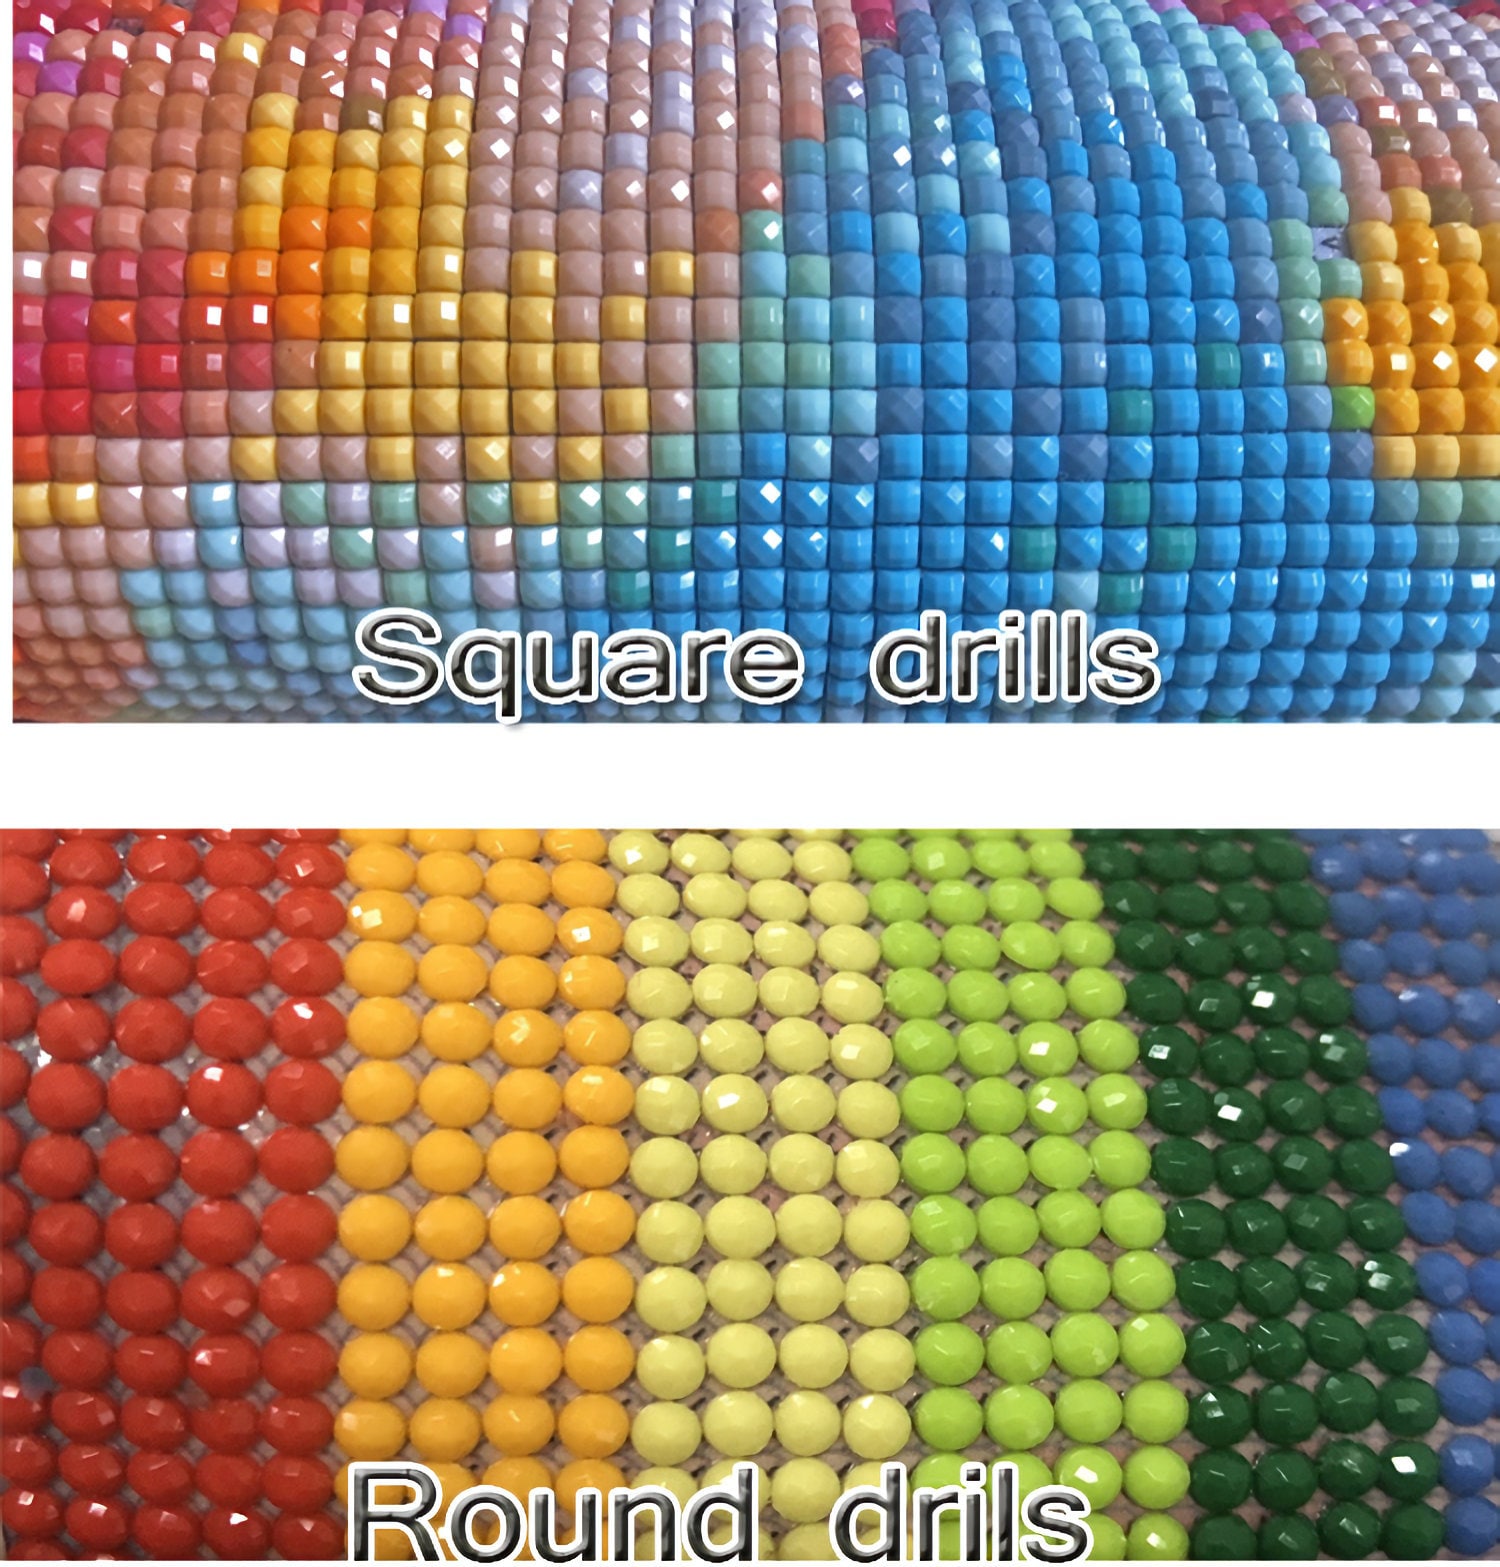 Tiny Round DMC Diamond Painting Labels, 0.5 Inch Round Color DMC Stickers  for Drill Organization & Storage, Cross Stitch Floss Labels 